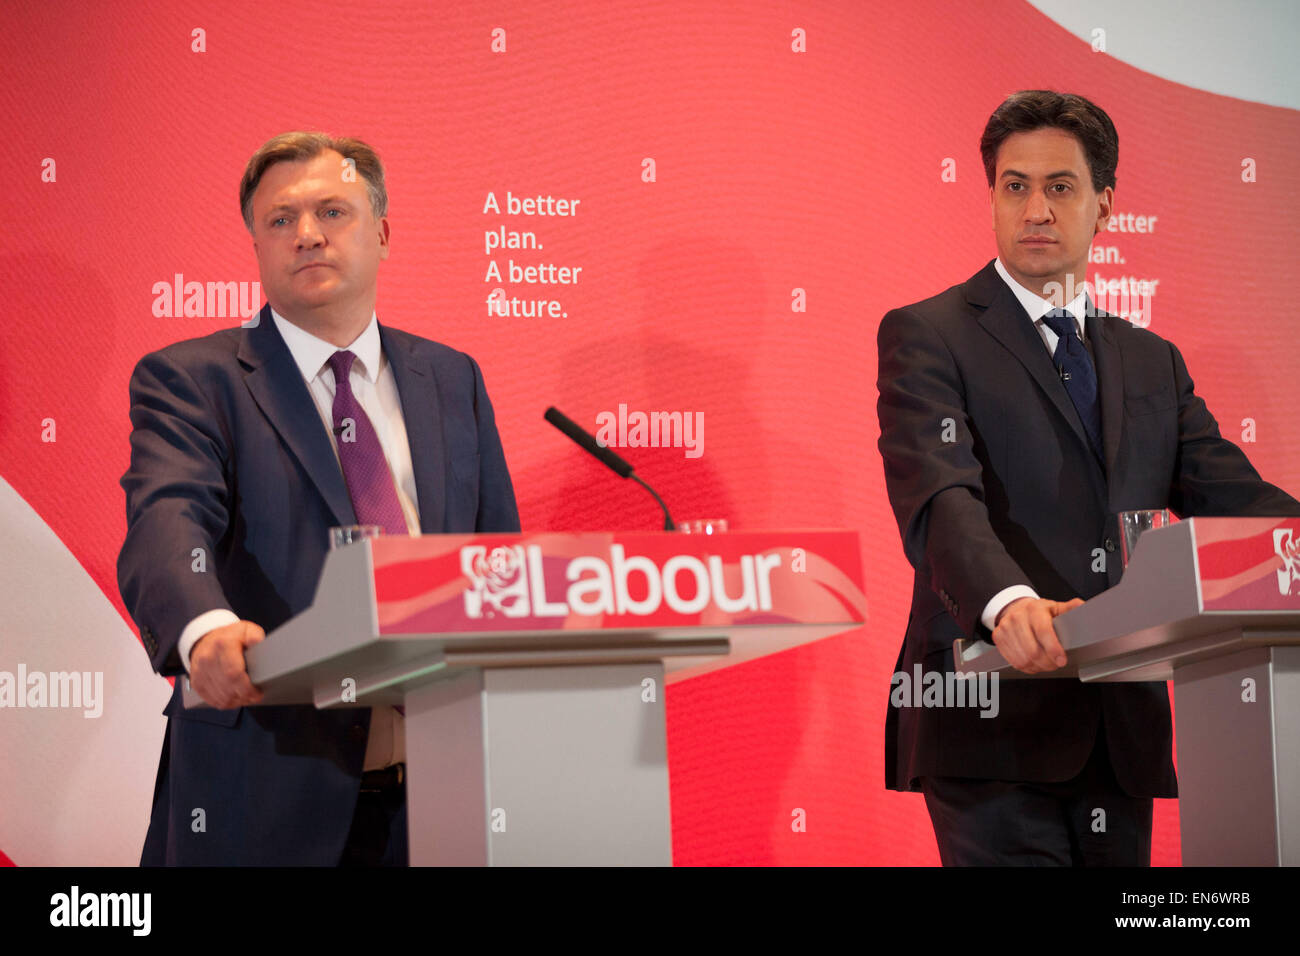 London, UK. Wednesday 29th April 2015. Labour Party Leader Ed Miliband, Shadow Chancellor Ed Balls at a General Election 2015 campaign event on the Tory threat to family finances, entitled: The Tories’ Secret Plan. Held at the Royal Institute of British Architects. Credit:  Michael Kemp/Alamy Live News Stock Photo